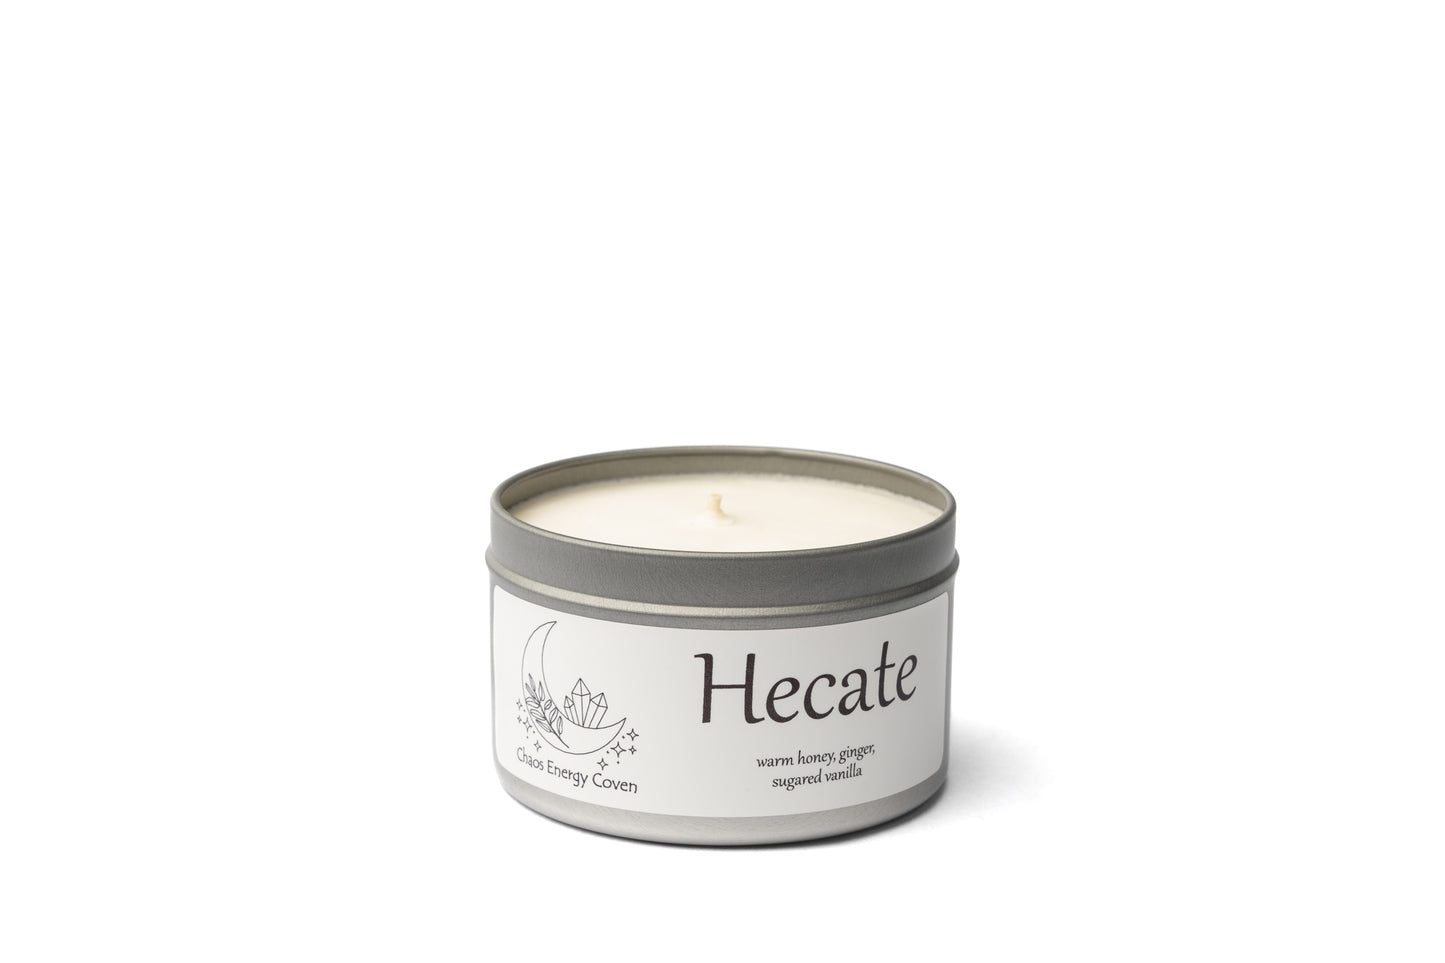 Hecate Candle